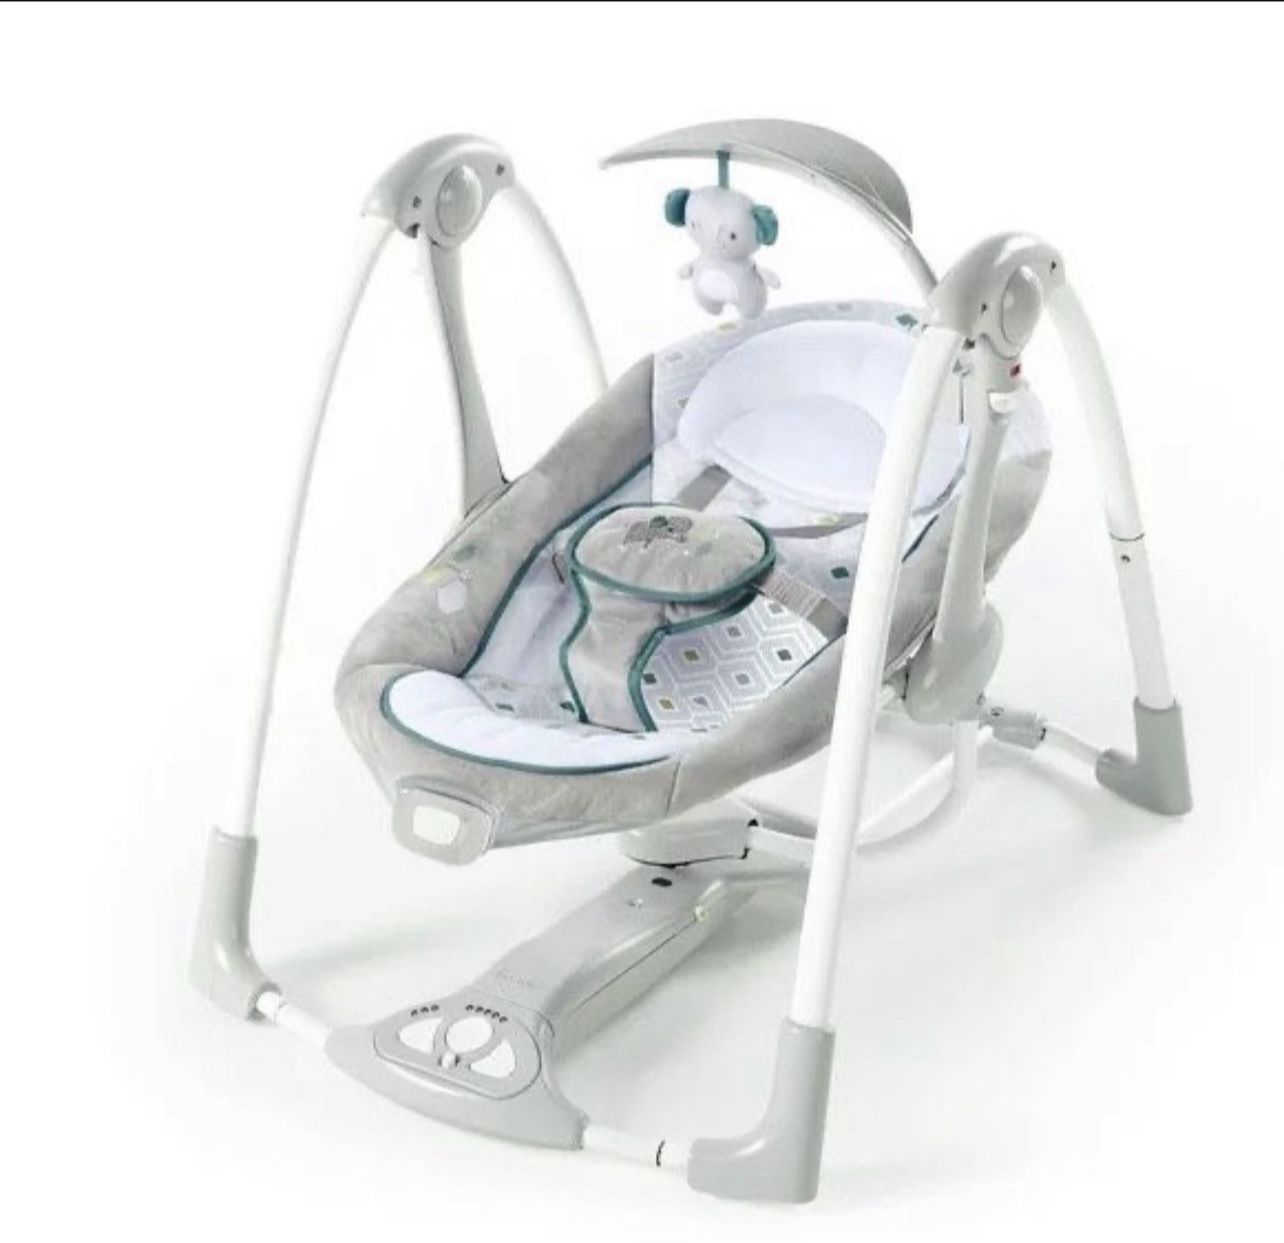 Ingenuity 2-in-1 Portable Battery-Powered Baby Swing & Infant Seat with Vibrations - Nash (Unisex)